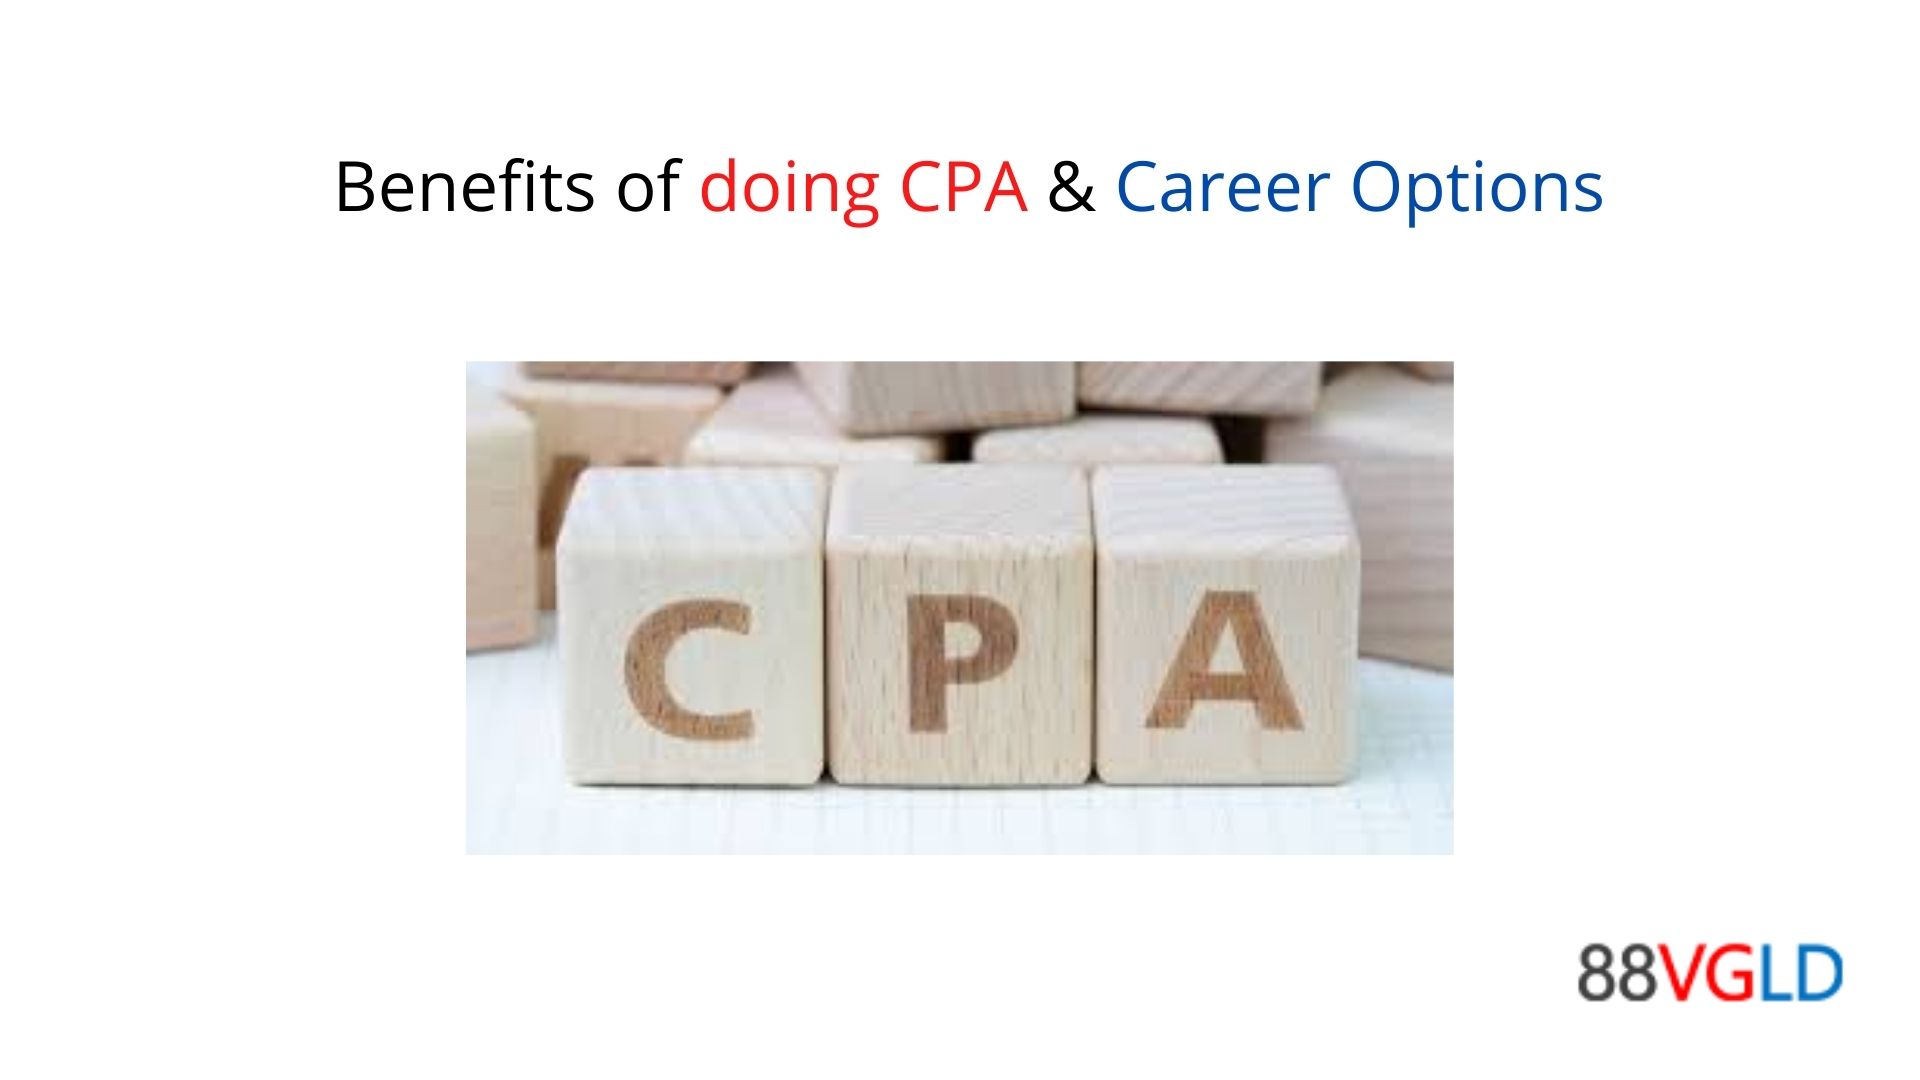 Benefits of doing CPA & Career Options